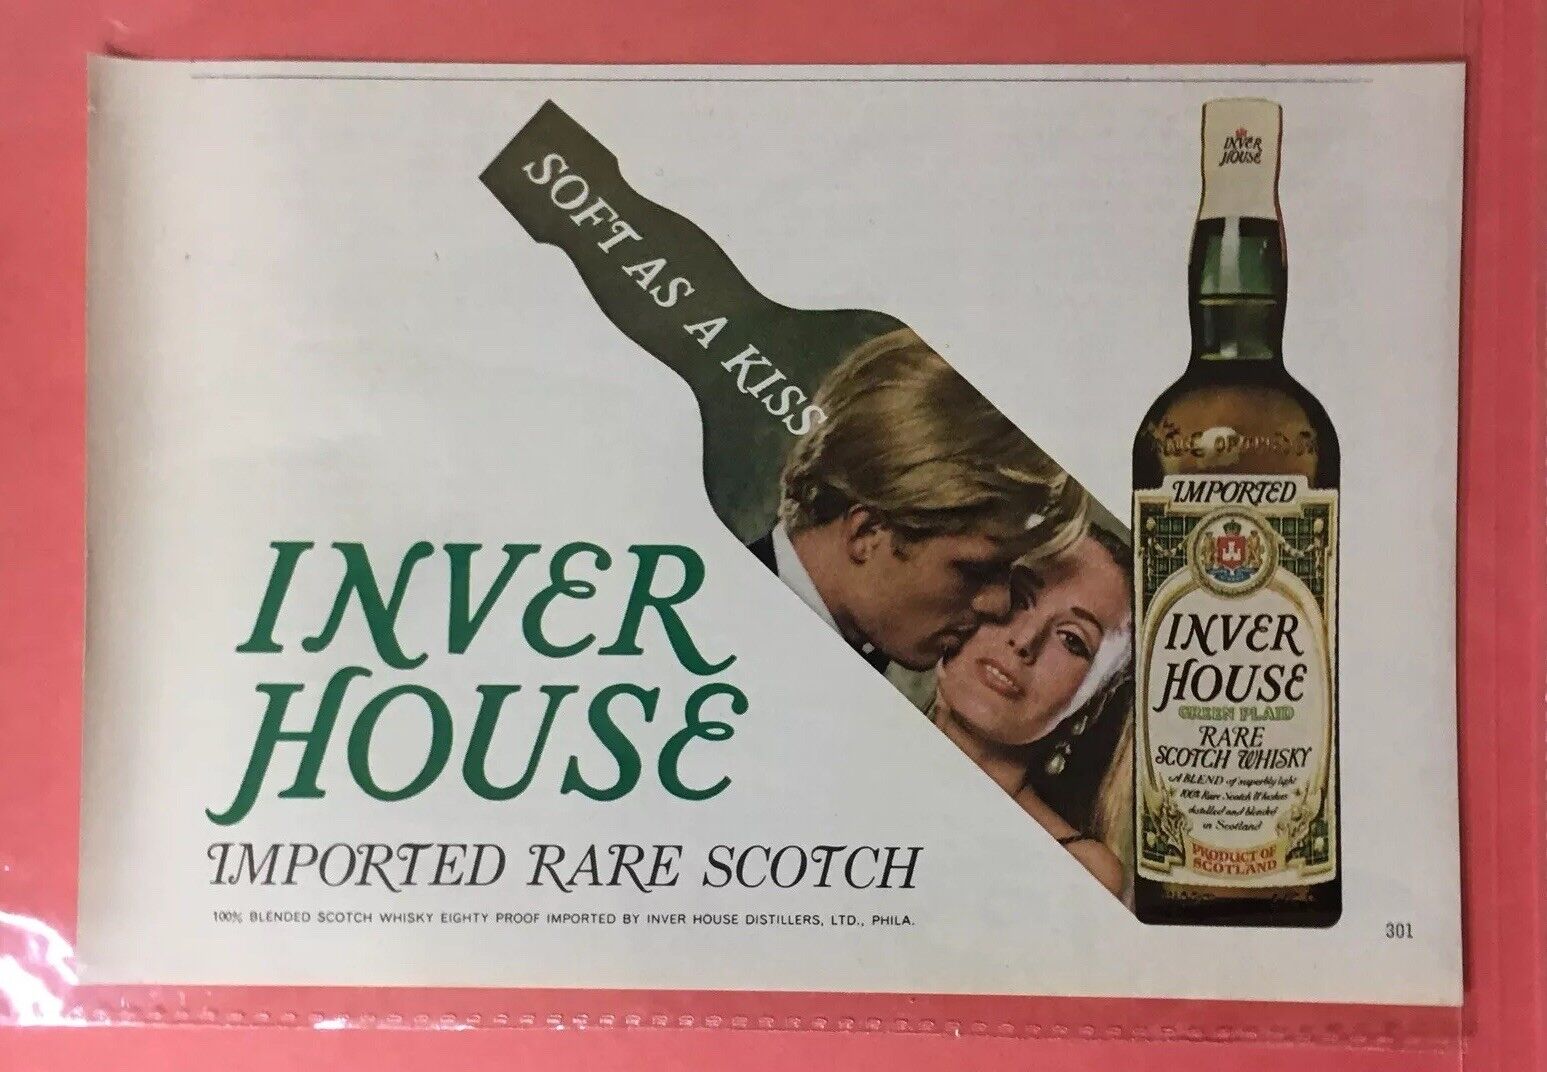 1968 INVER HOUSE Scotch Whiskey Soft As A Kiss Vintage Print Ad